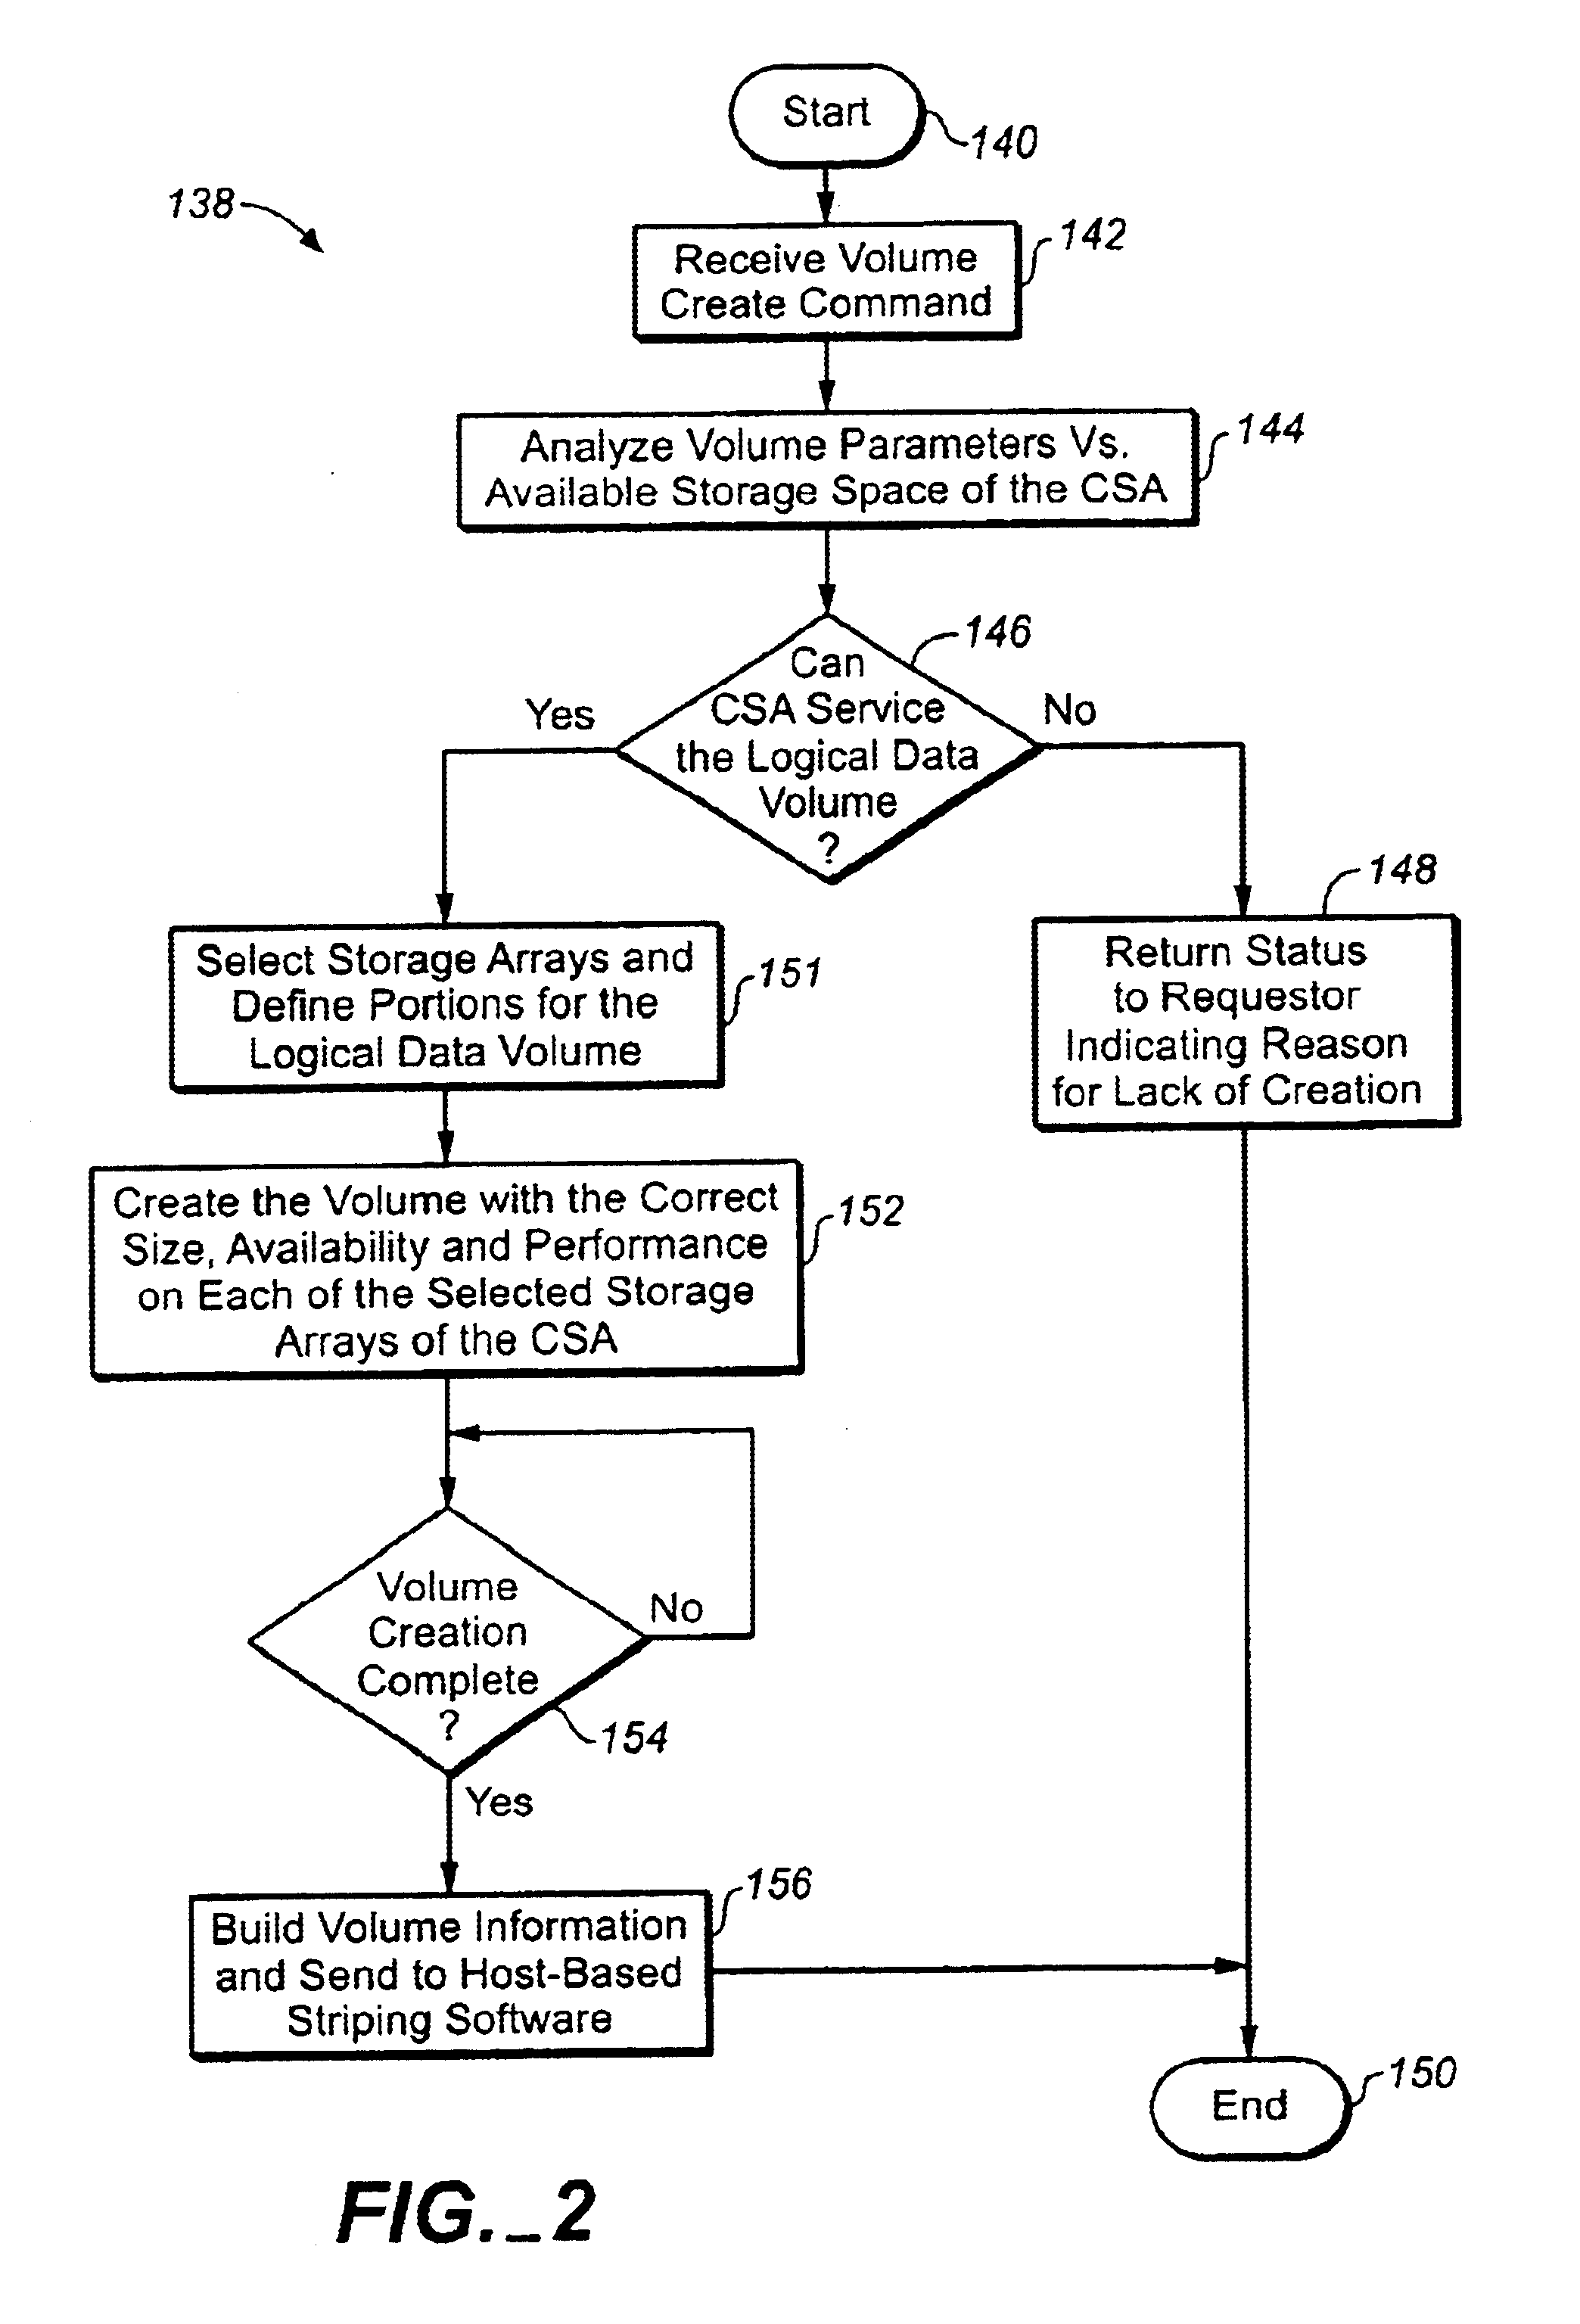 Configuring and monitoring data volumes in a consolidated storage array using one storage array to configure the other storage arrays